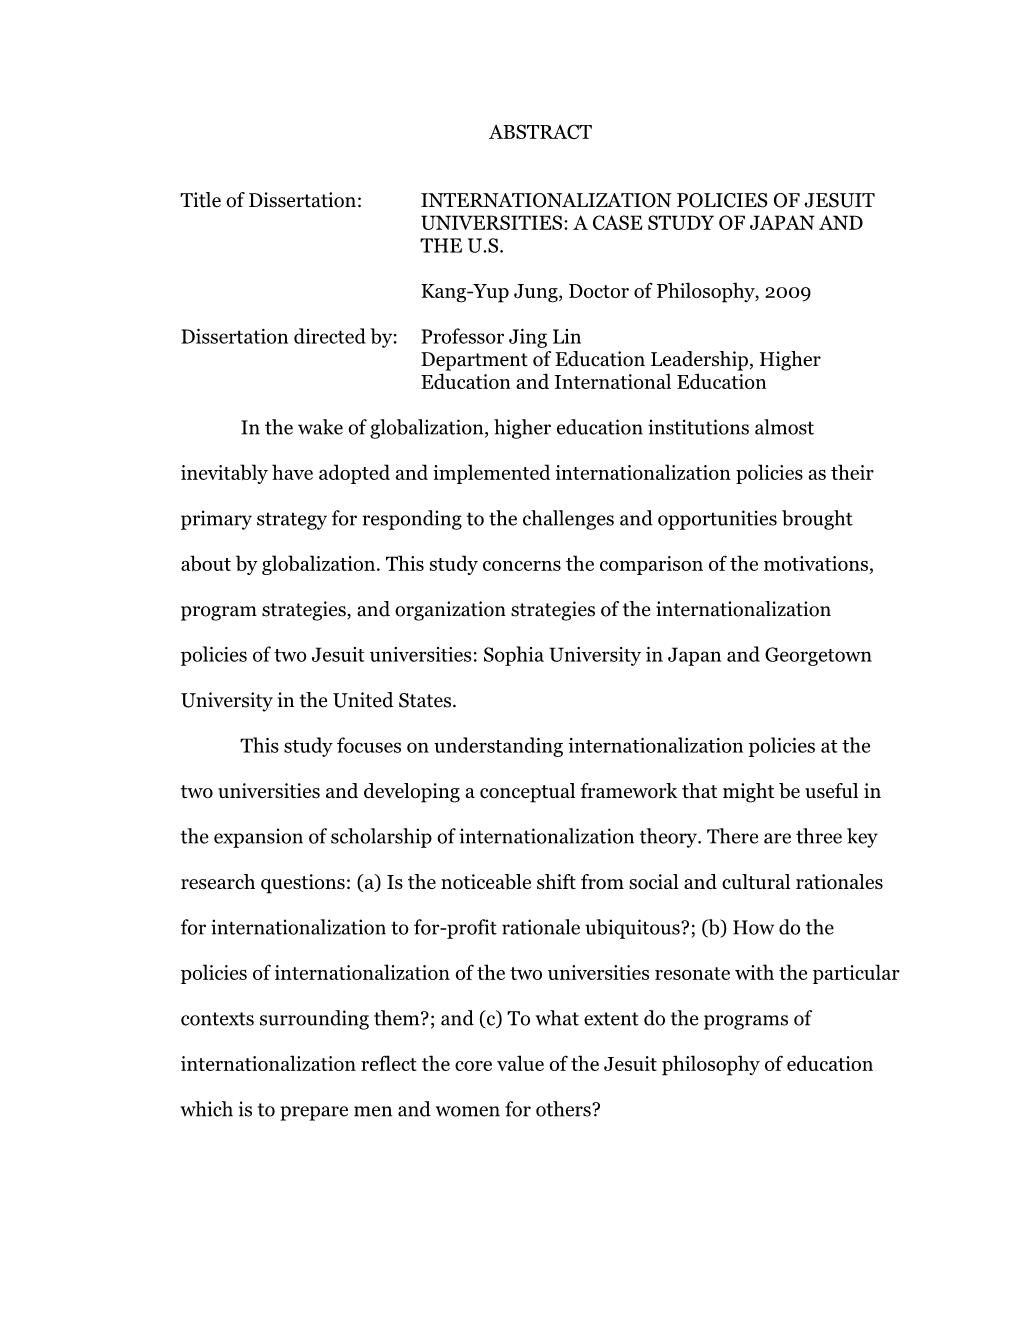 Internationalization Policies of Jesuit Universities: a Case Study of Japan and the U.S